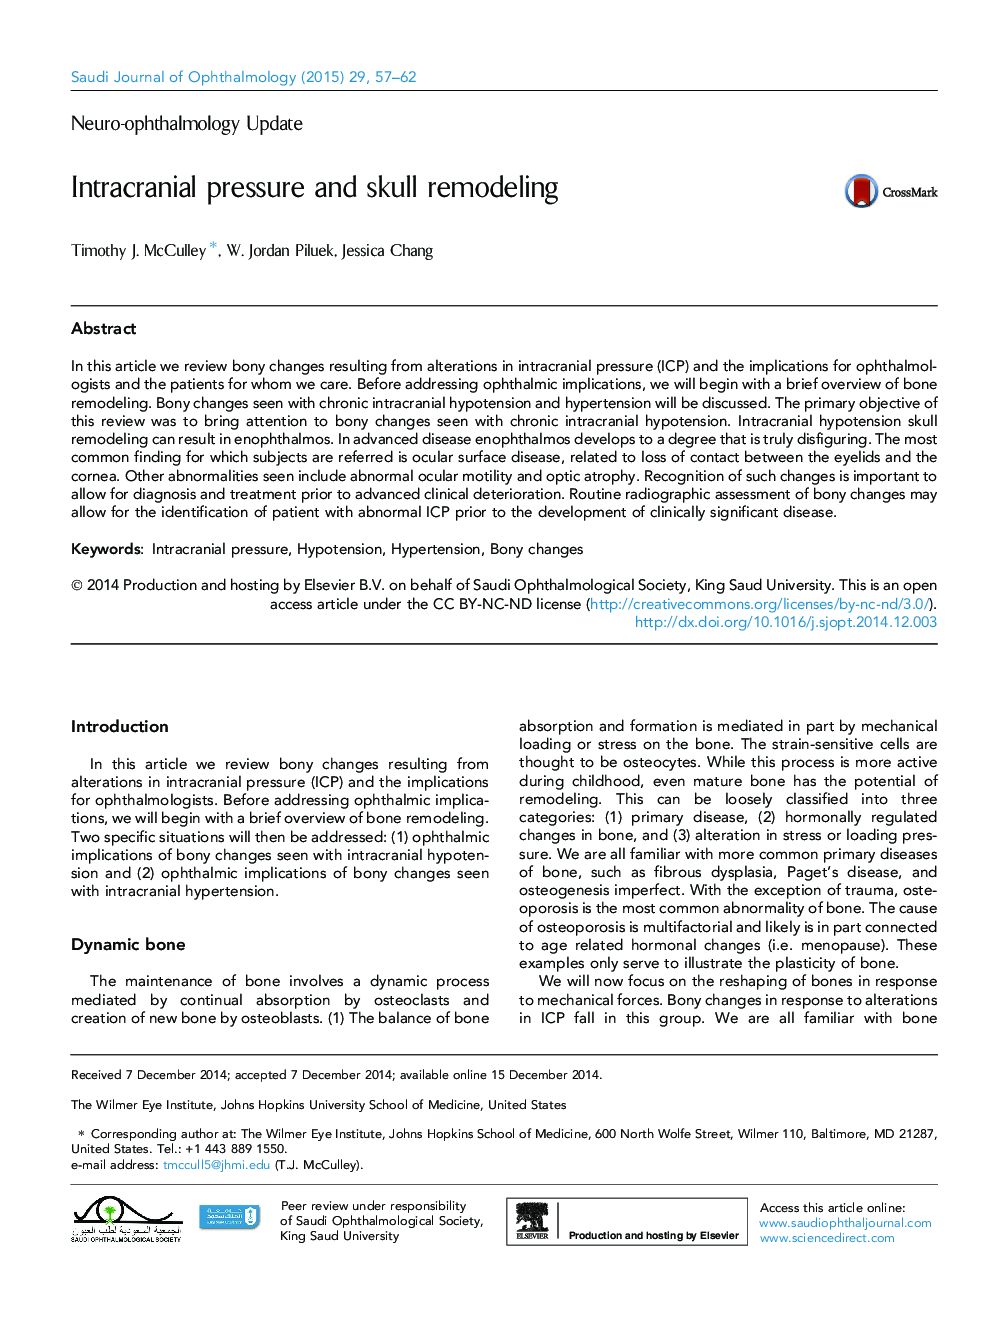 Intracranial pressure and skull remodeling 